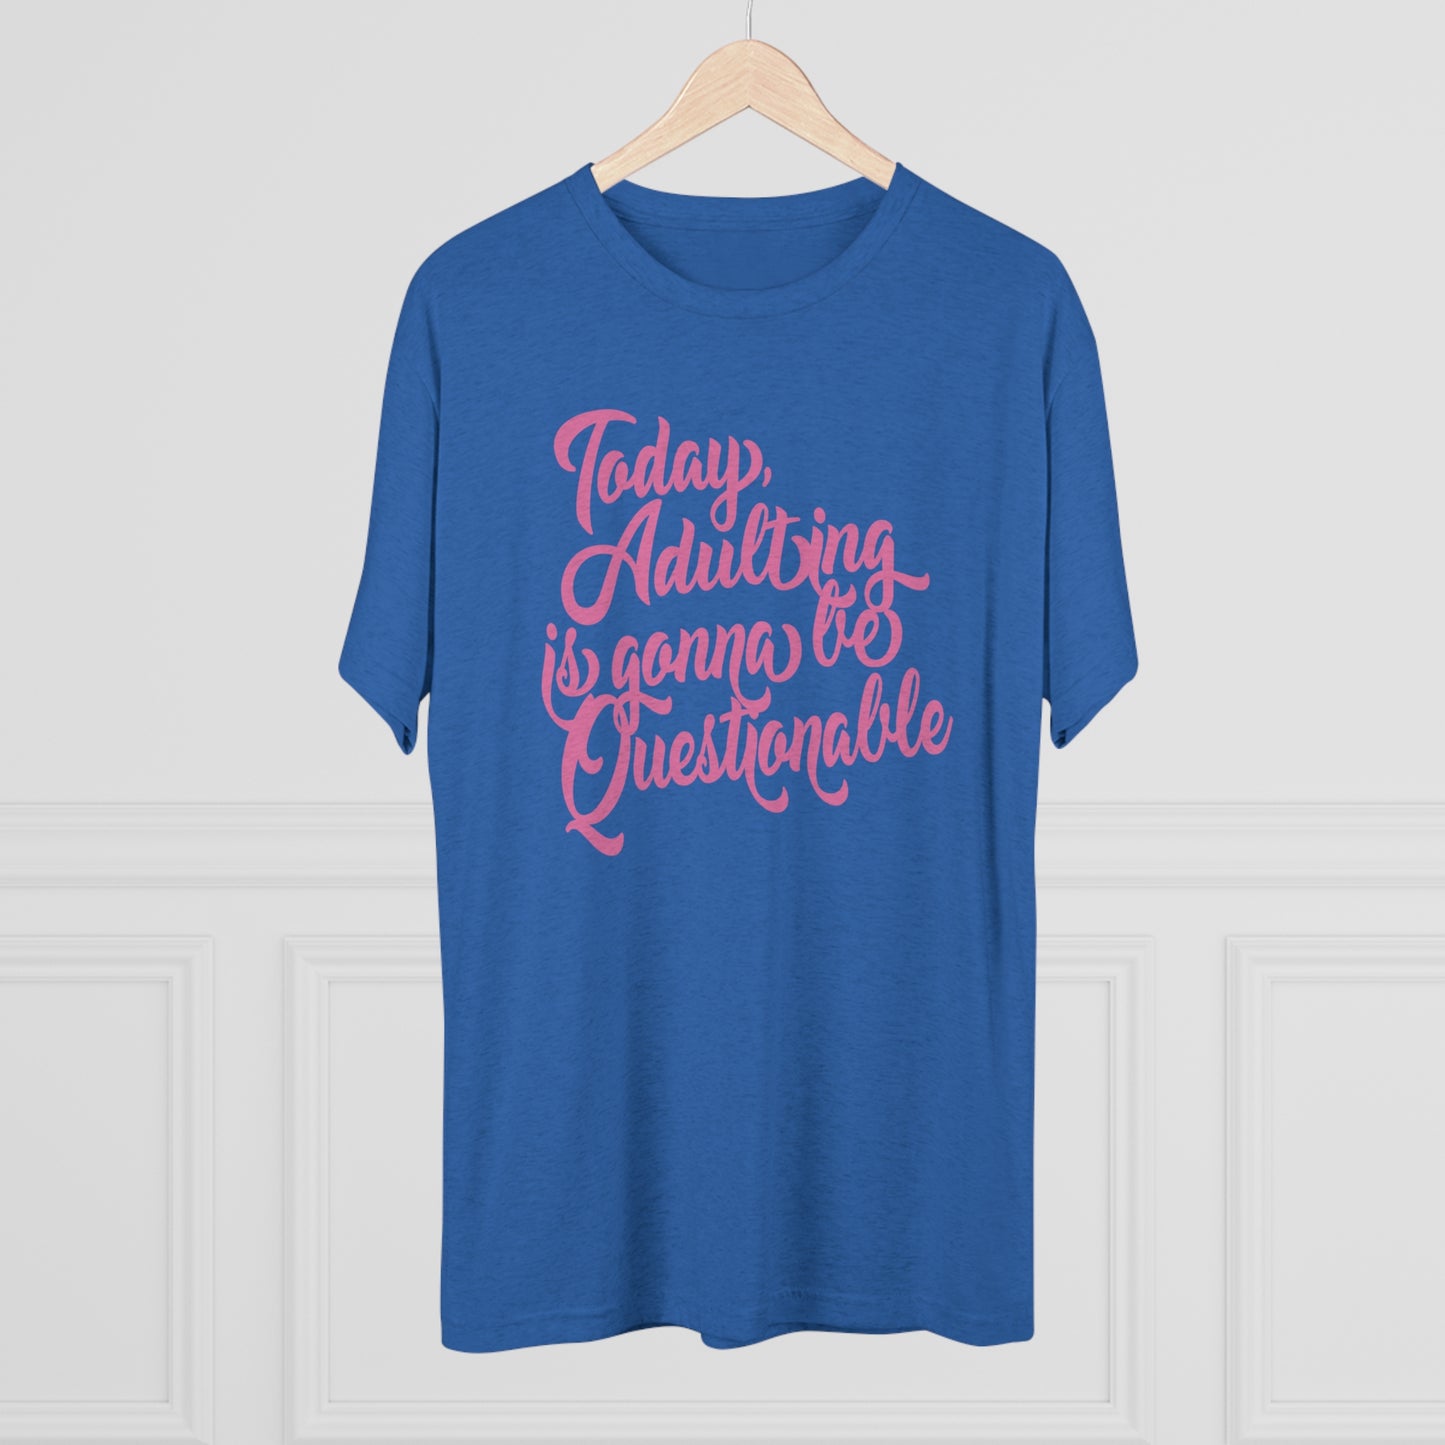 Today Adulting is gonna be Questionable-Unisex Tri-Blend Crew Tee